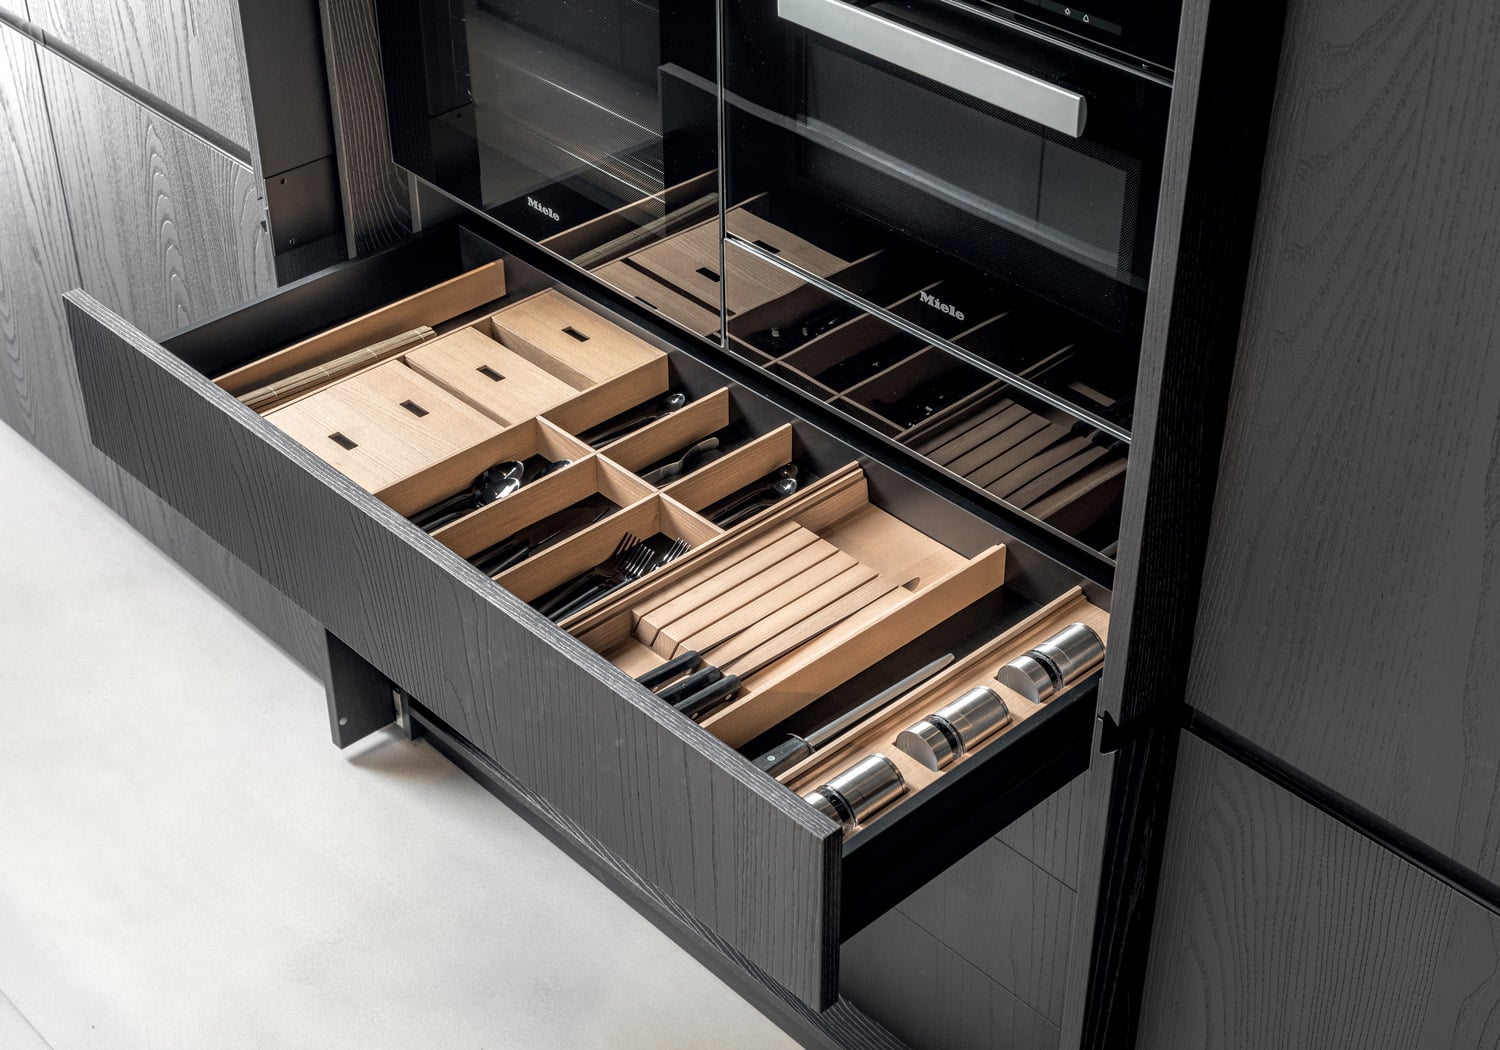 Drawers were equipped with personalized Rima cutlery trays, spice holders, and containers to make the most of the space and make it easy to keep items organized.